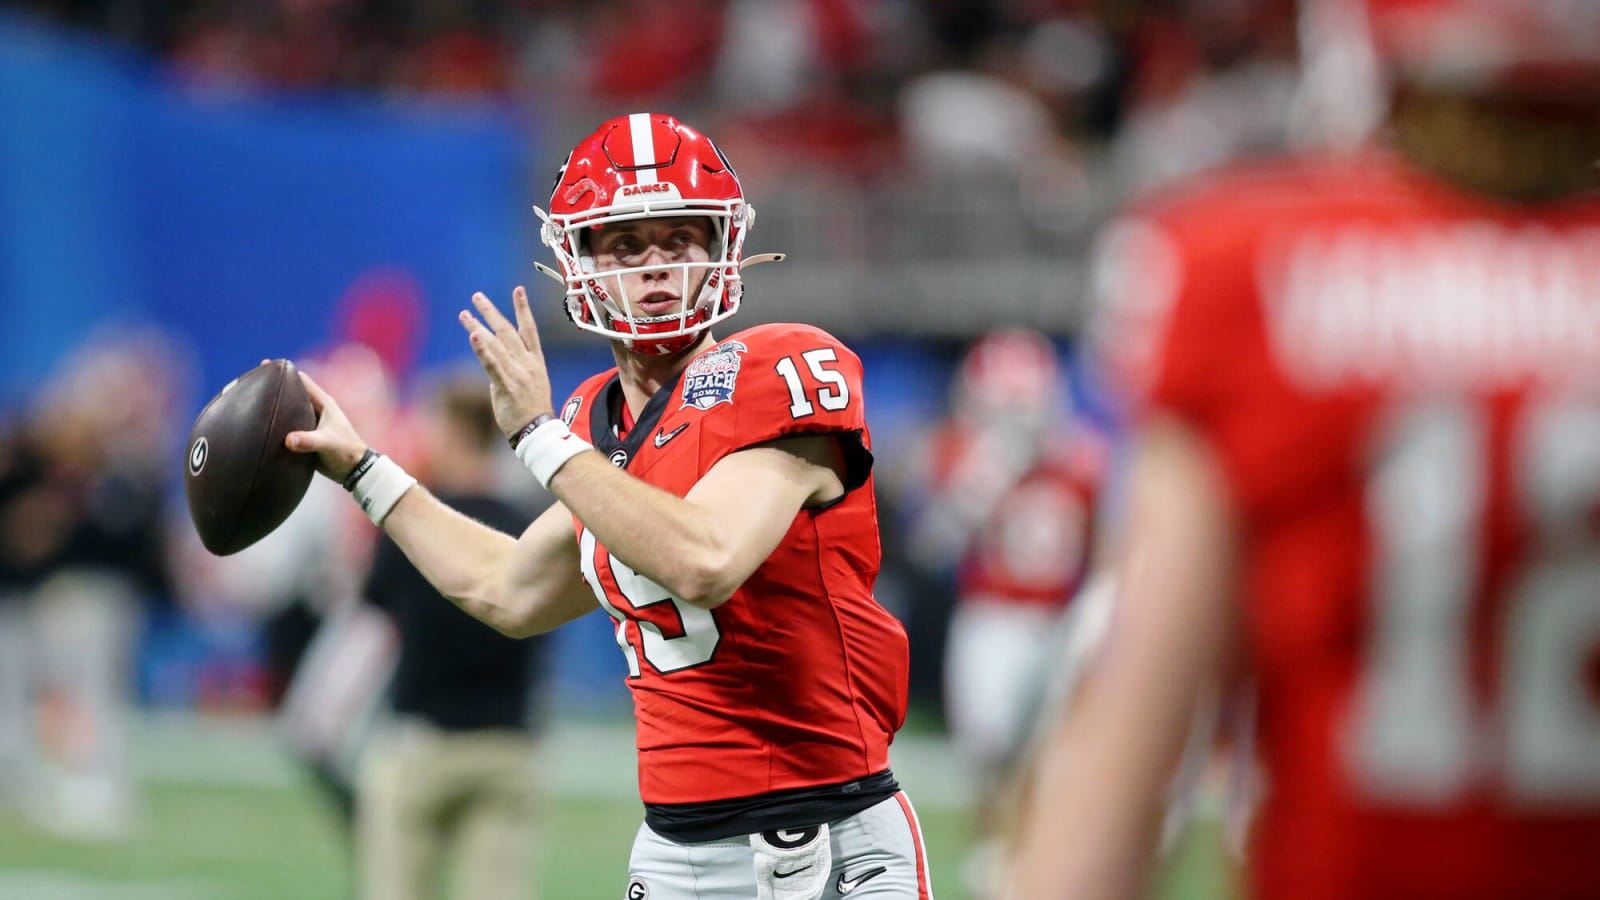 NCAAF Top 25 futures: Does Georgia have what it takes to three-peat?